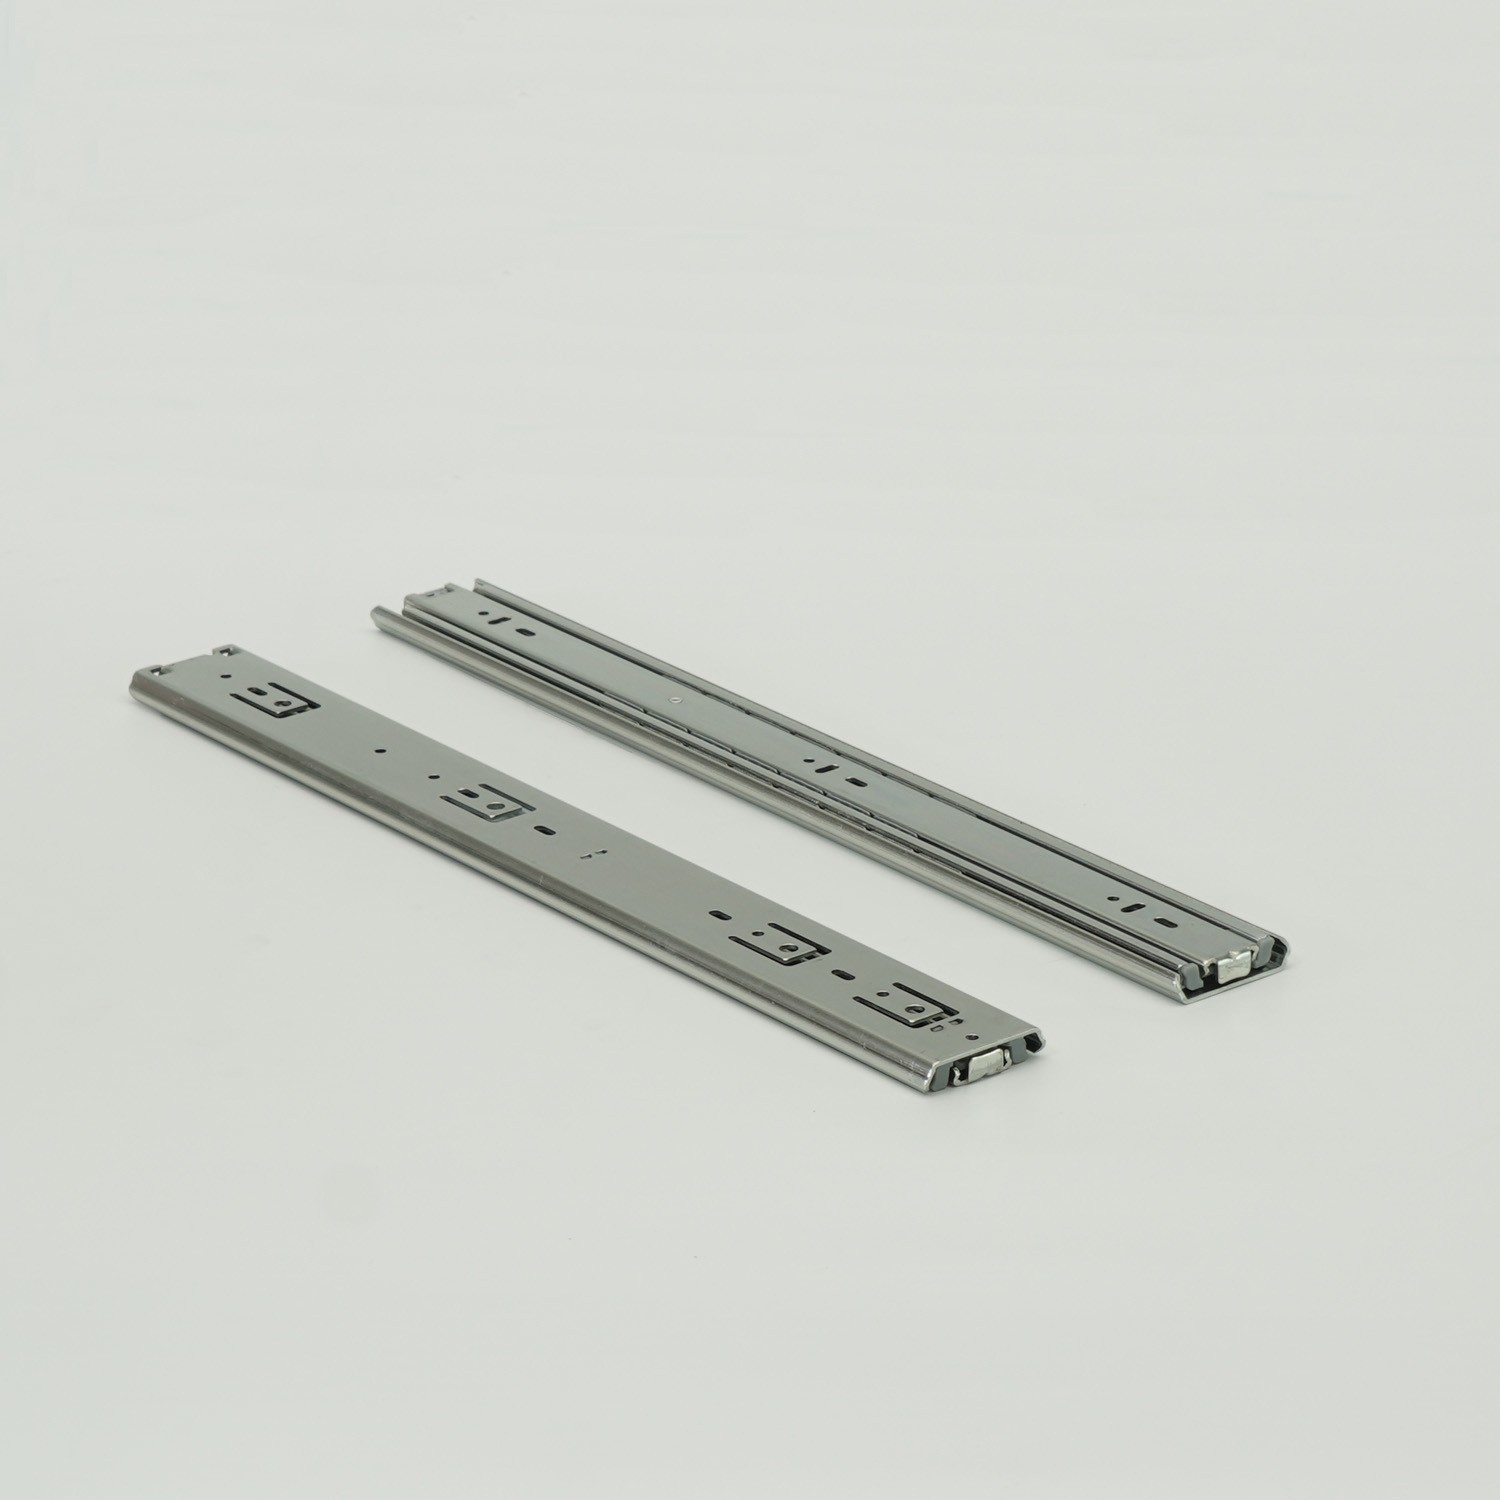 51mm 200lbs Heavy Load Ball Bearing Full Extension Drawer Slides